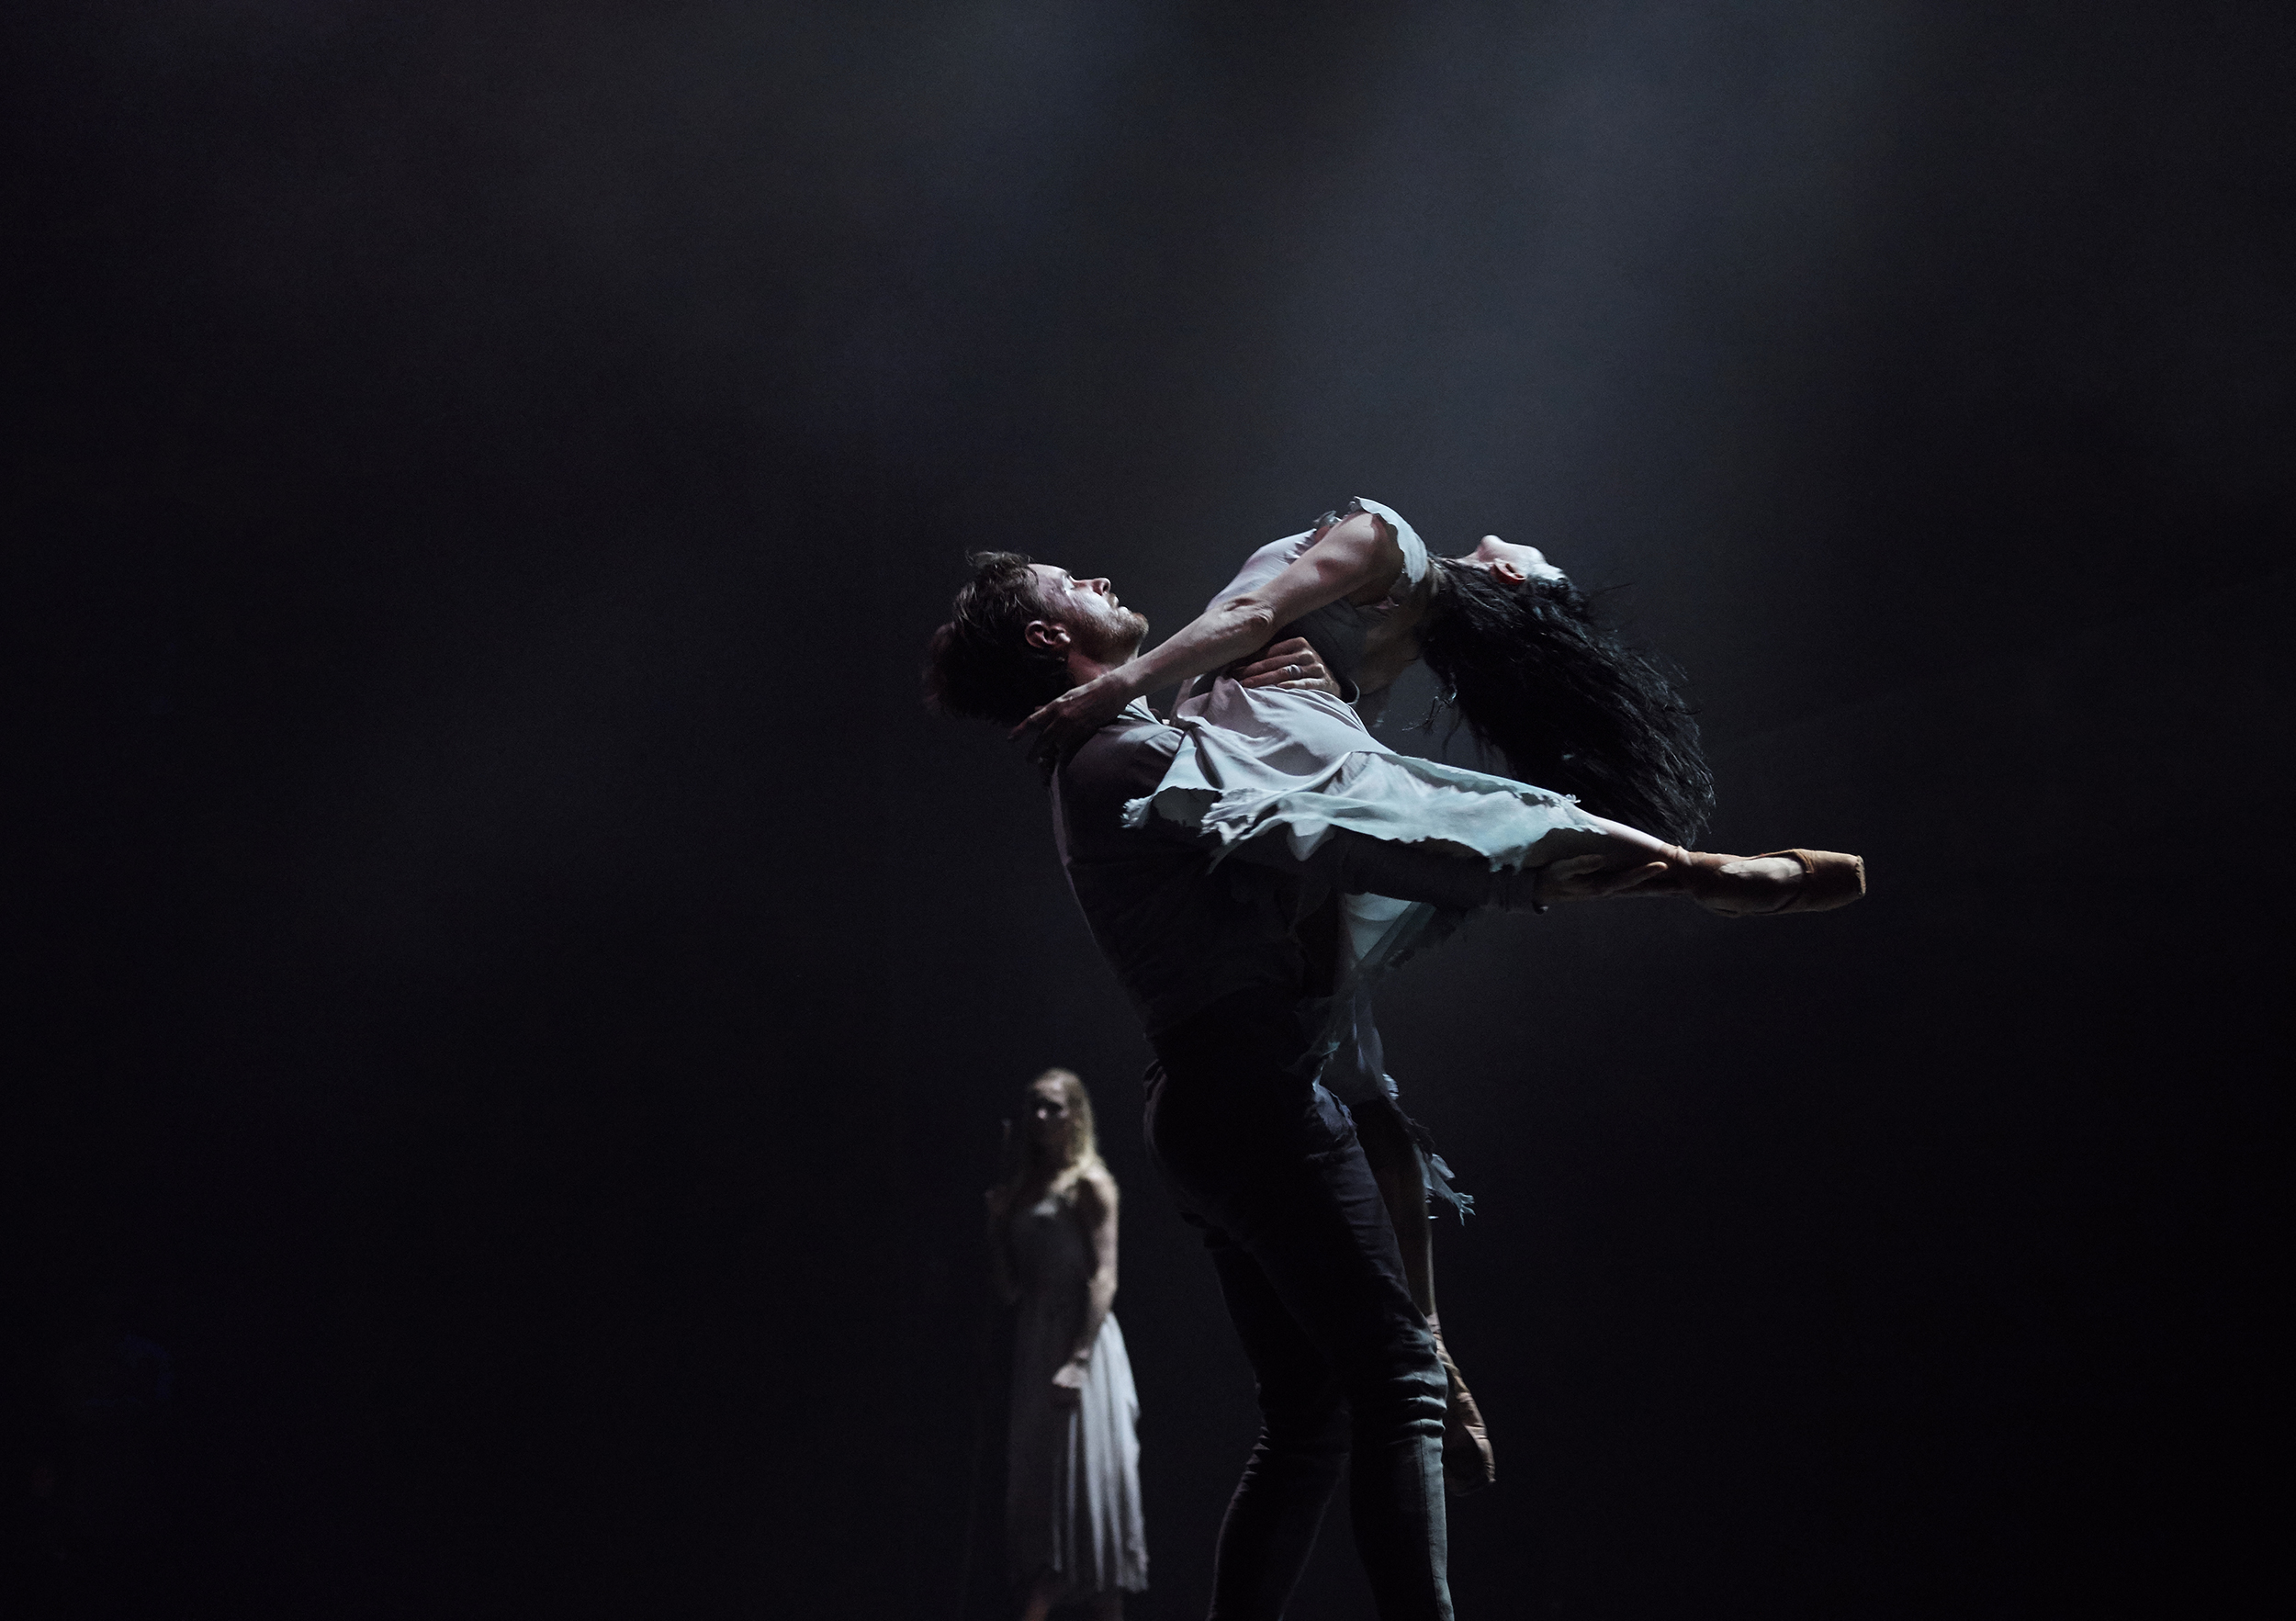 James Streeter lifts Tamara Rojo with his left arm wrapped around her back and his right arm lifting her back leg. She arches back in a dramatic arabesque with her stomach on his chest and long dark hair flying back. In the background, a female dancer stands and watches, illuminated against a dark backdrop.